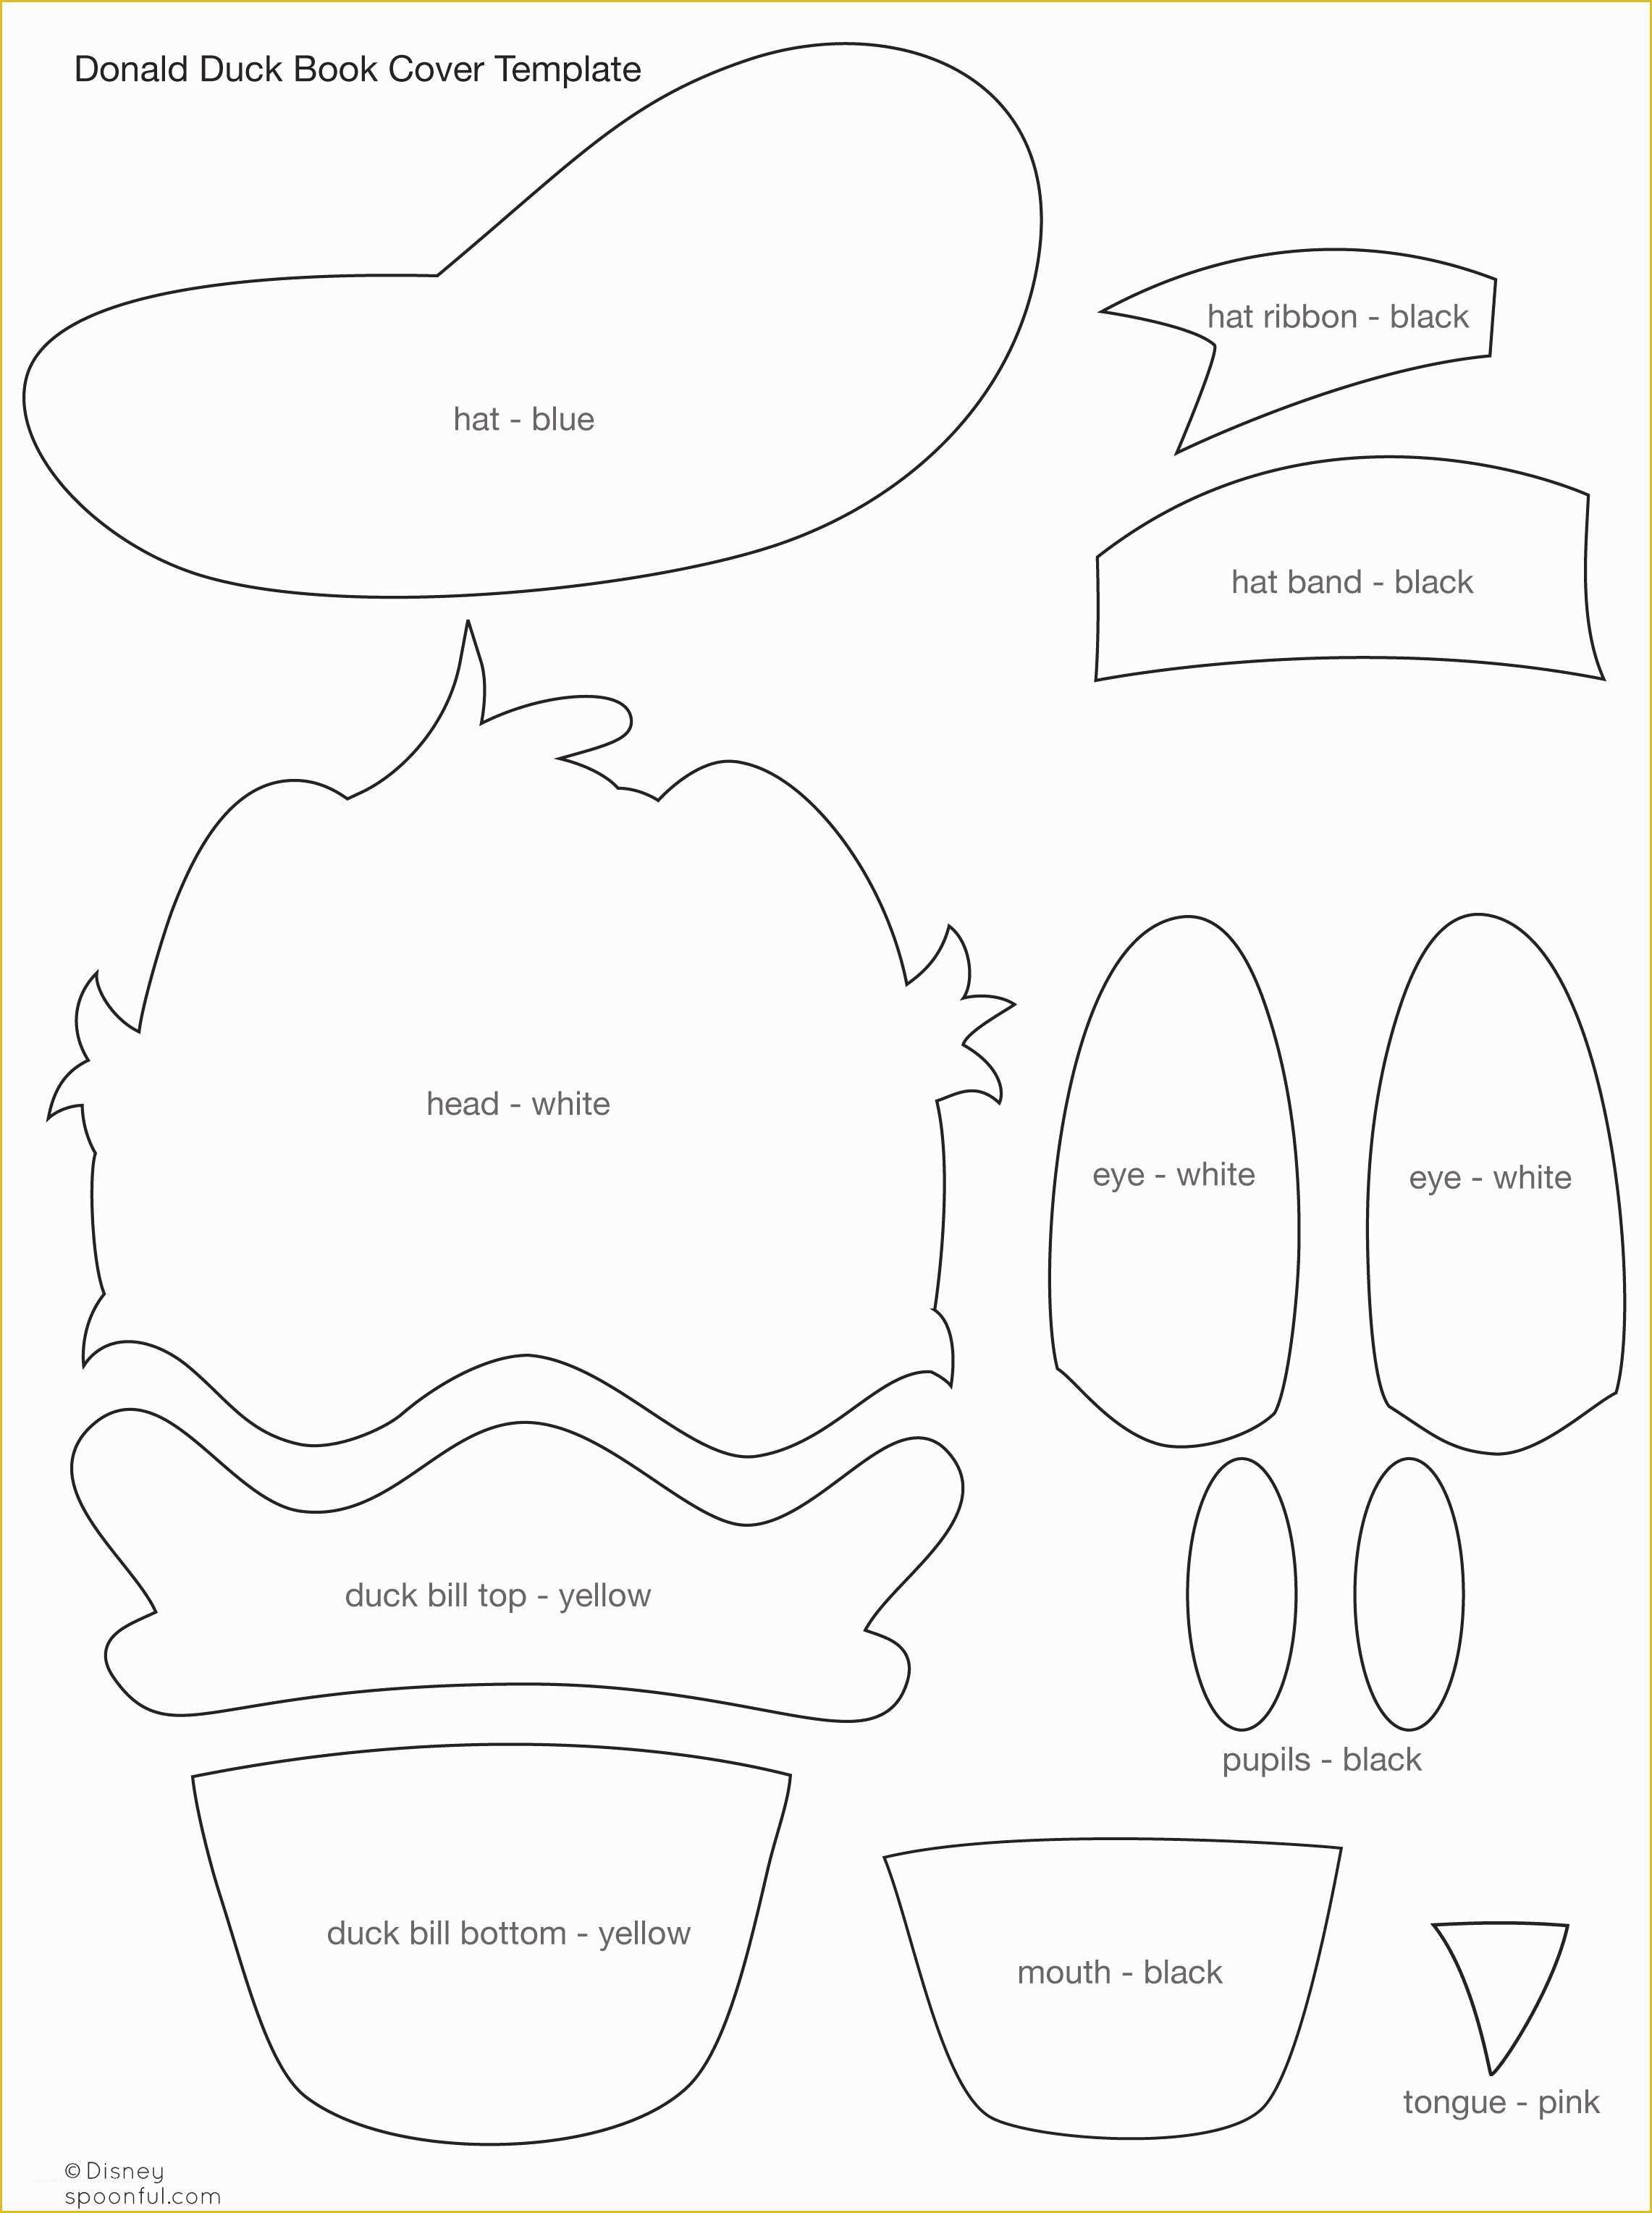 Free Children's Book Template Of Donald Duck Template Cut Out